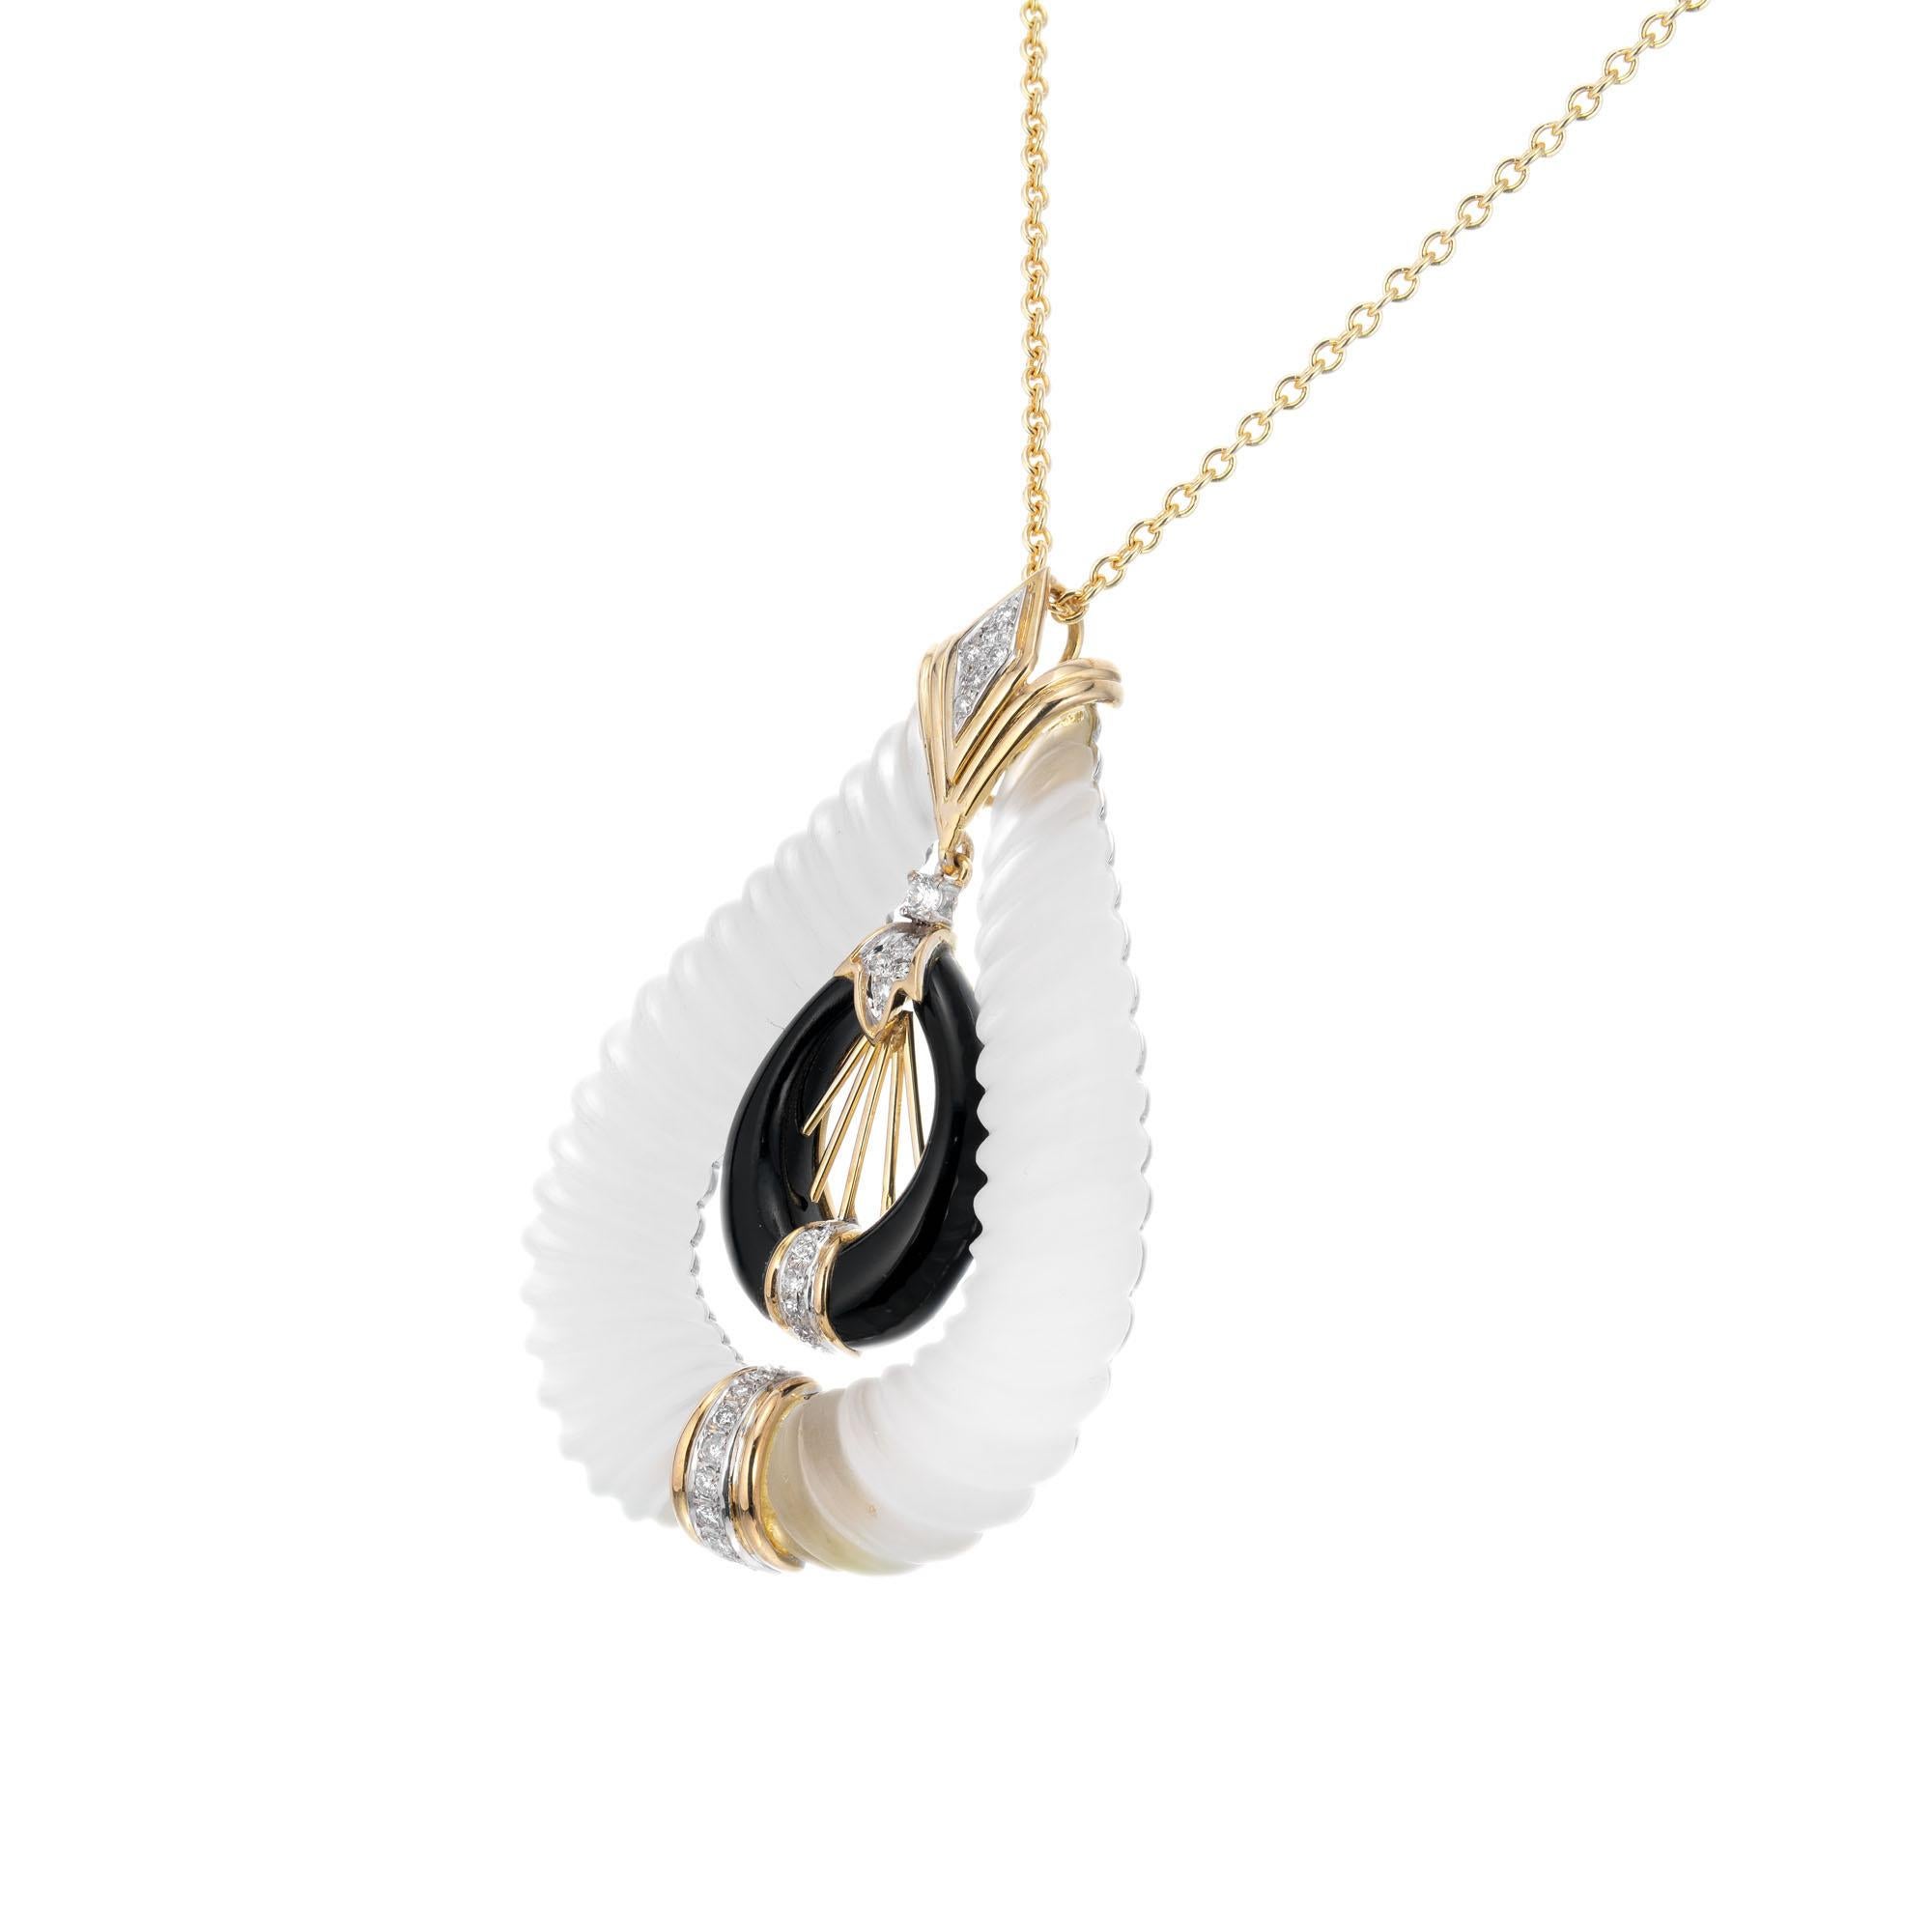 Onyx, diamond and quartz pendant necklace. Set in 14k yellow gold and sterling silver set with frosted quartz, black onyx and 25 accent diamonds on a 14 yellow gold chain. 

25 round brilliant cut diamonds G-H VS-SI, approx. .40ct
14k yellow gold